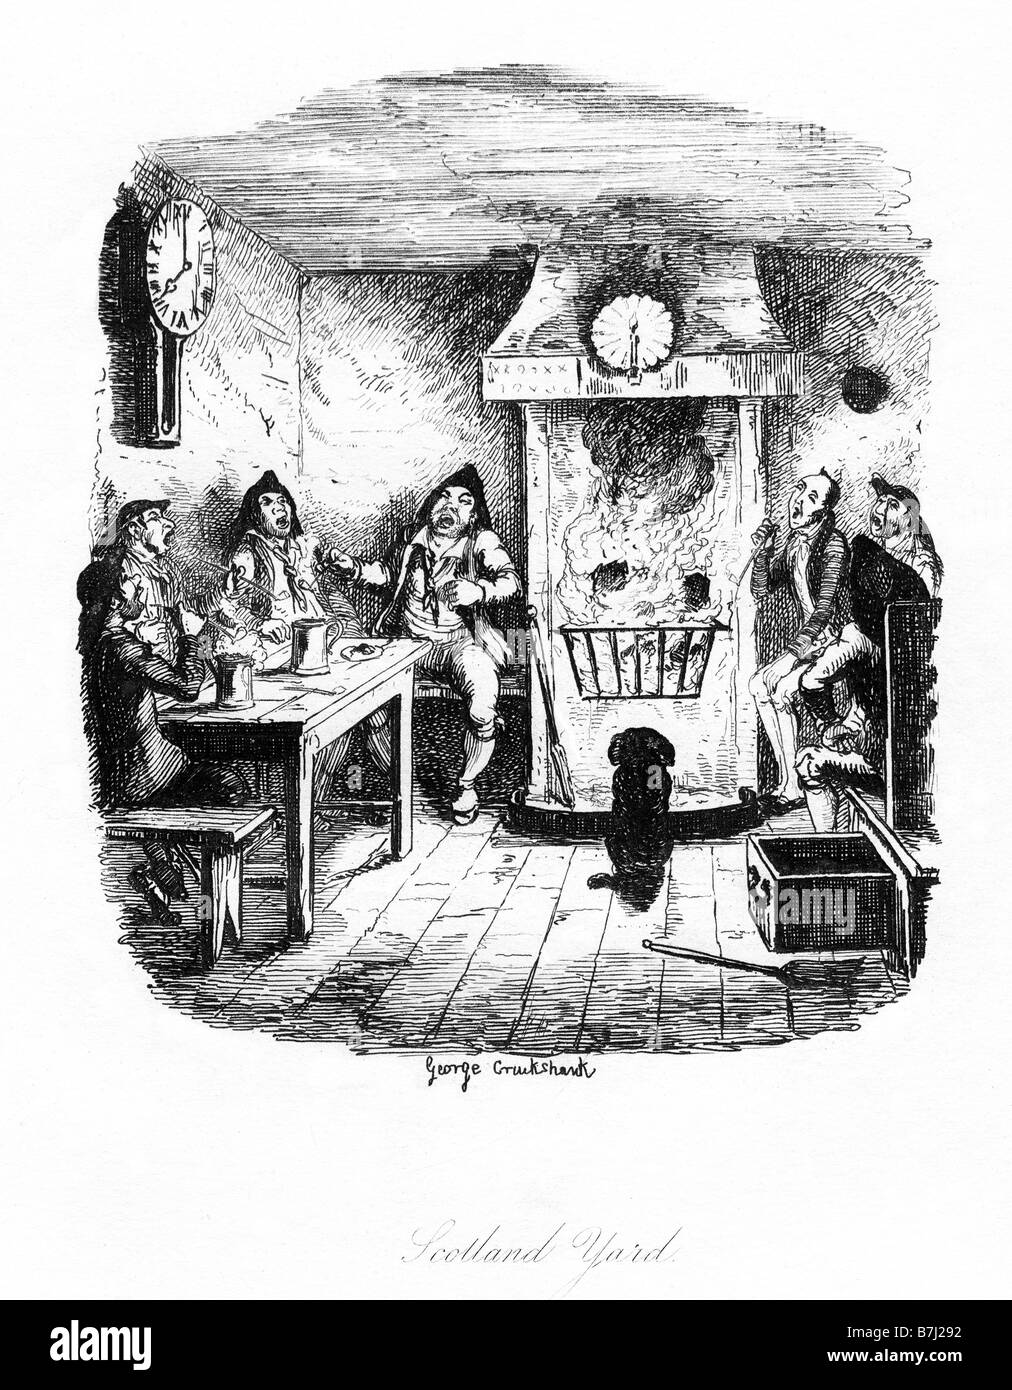 Sketches by Boz Scotland Yard illustration by George Cruikshank from Dickens of a public house on the site of Met Police HQ Stock Photo